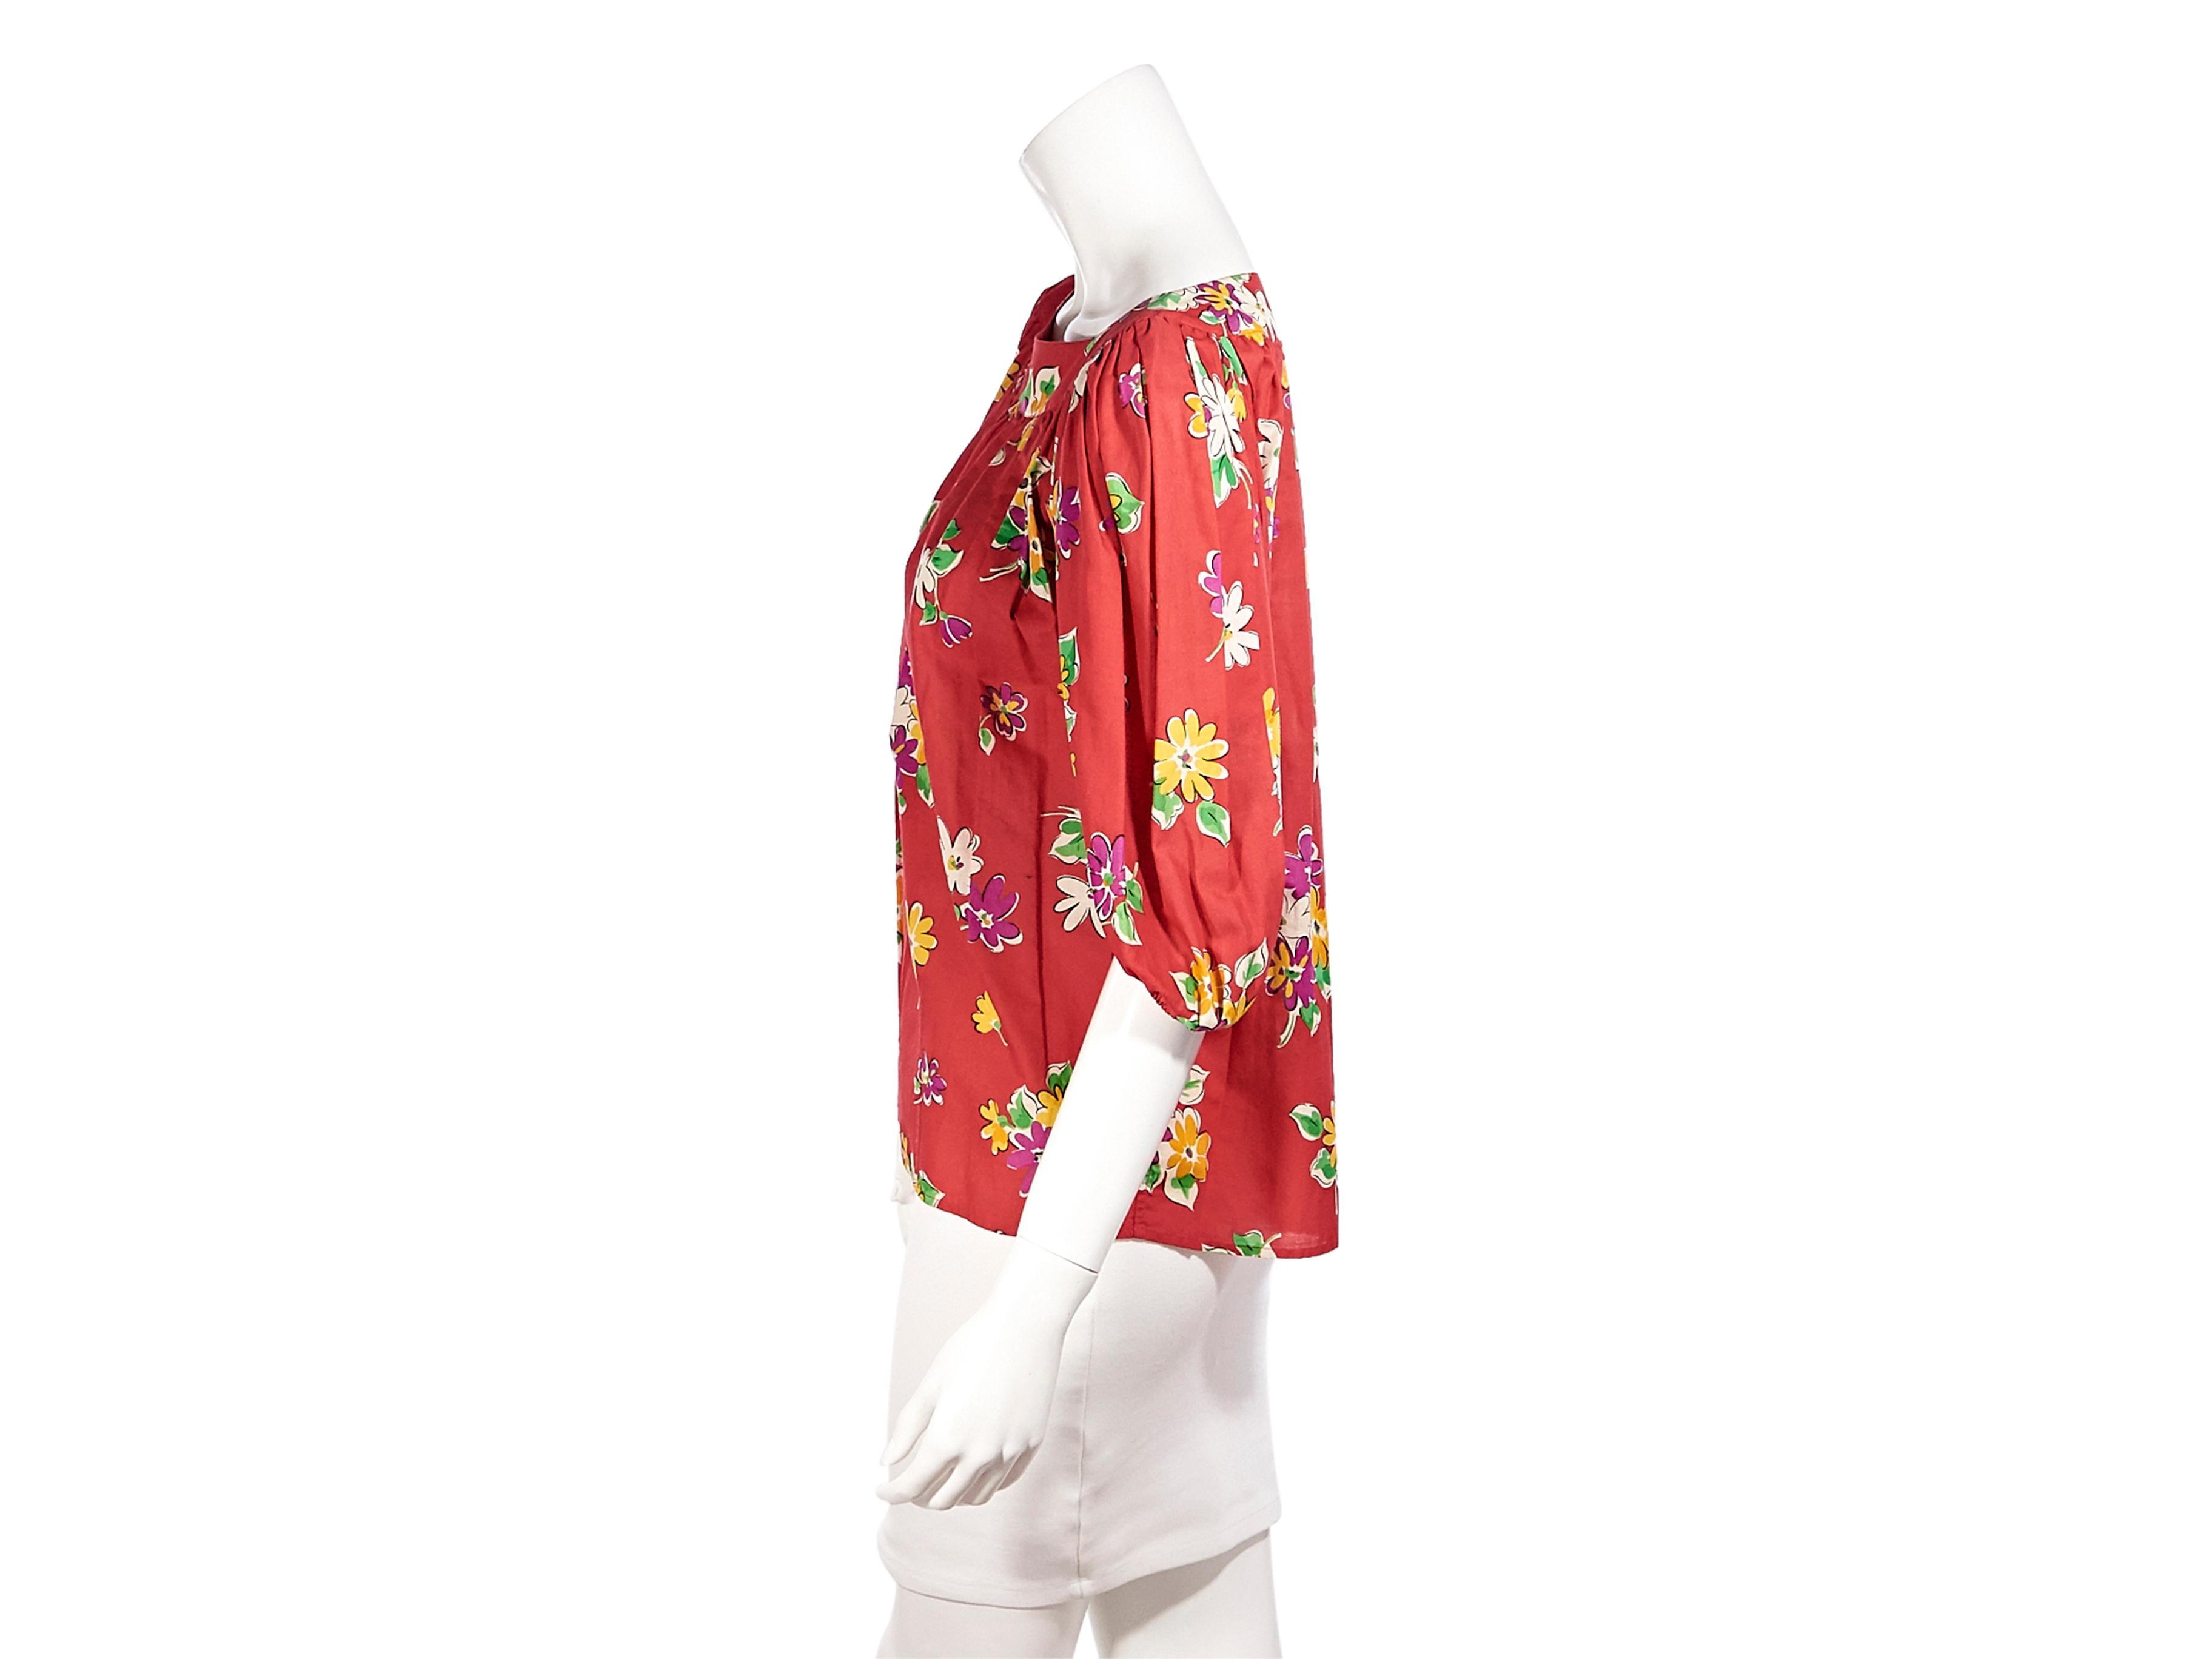 Product details:  Vintage red floral-printed blouse by Saint Laurent Rive Gauche. Bateau neckline. Puff shoulder dolman sleeves. Elasticated-trimmed cuffs. Slip-on style. Pair yours with denim shorts. Label size FR 38. 40